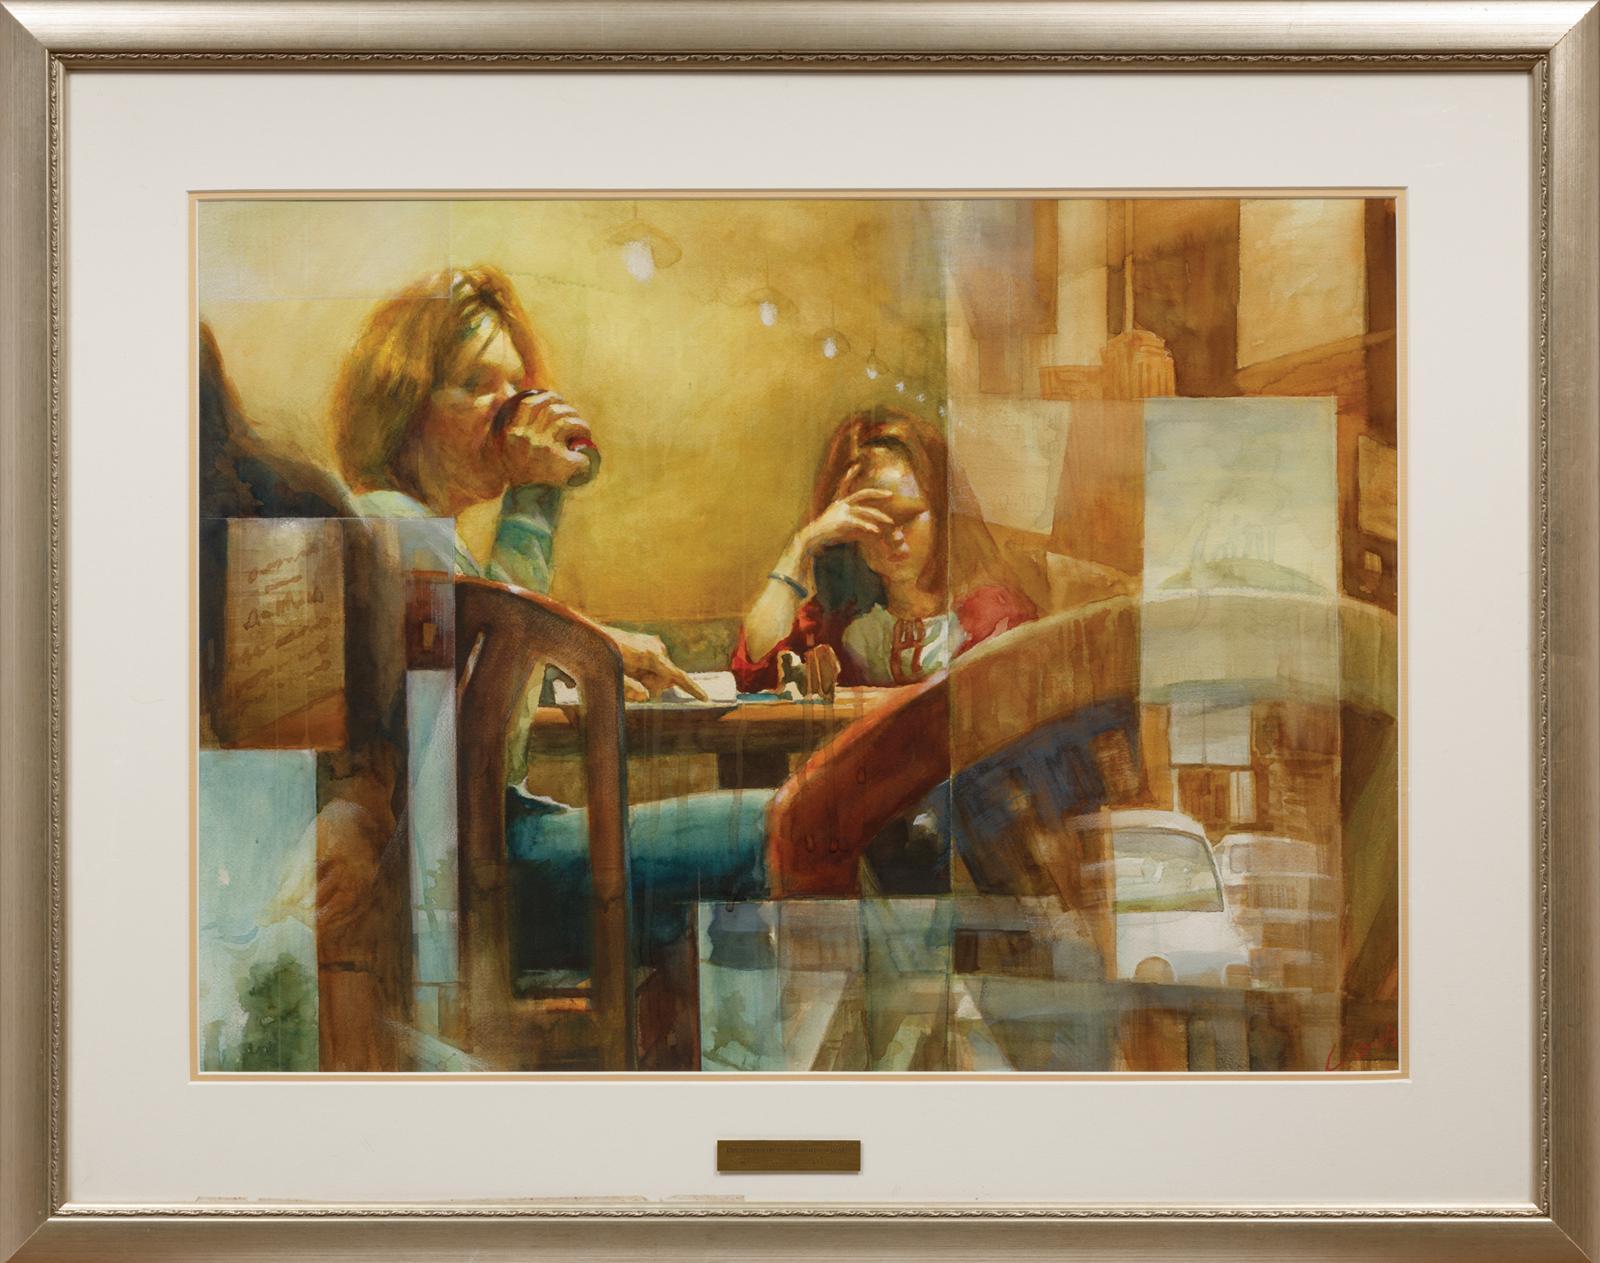 Dongfeng Li Figurative Art - "Mom's Coffee Time" (AWCS Award Winner) Framed Contemporary Watercolor Painting